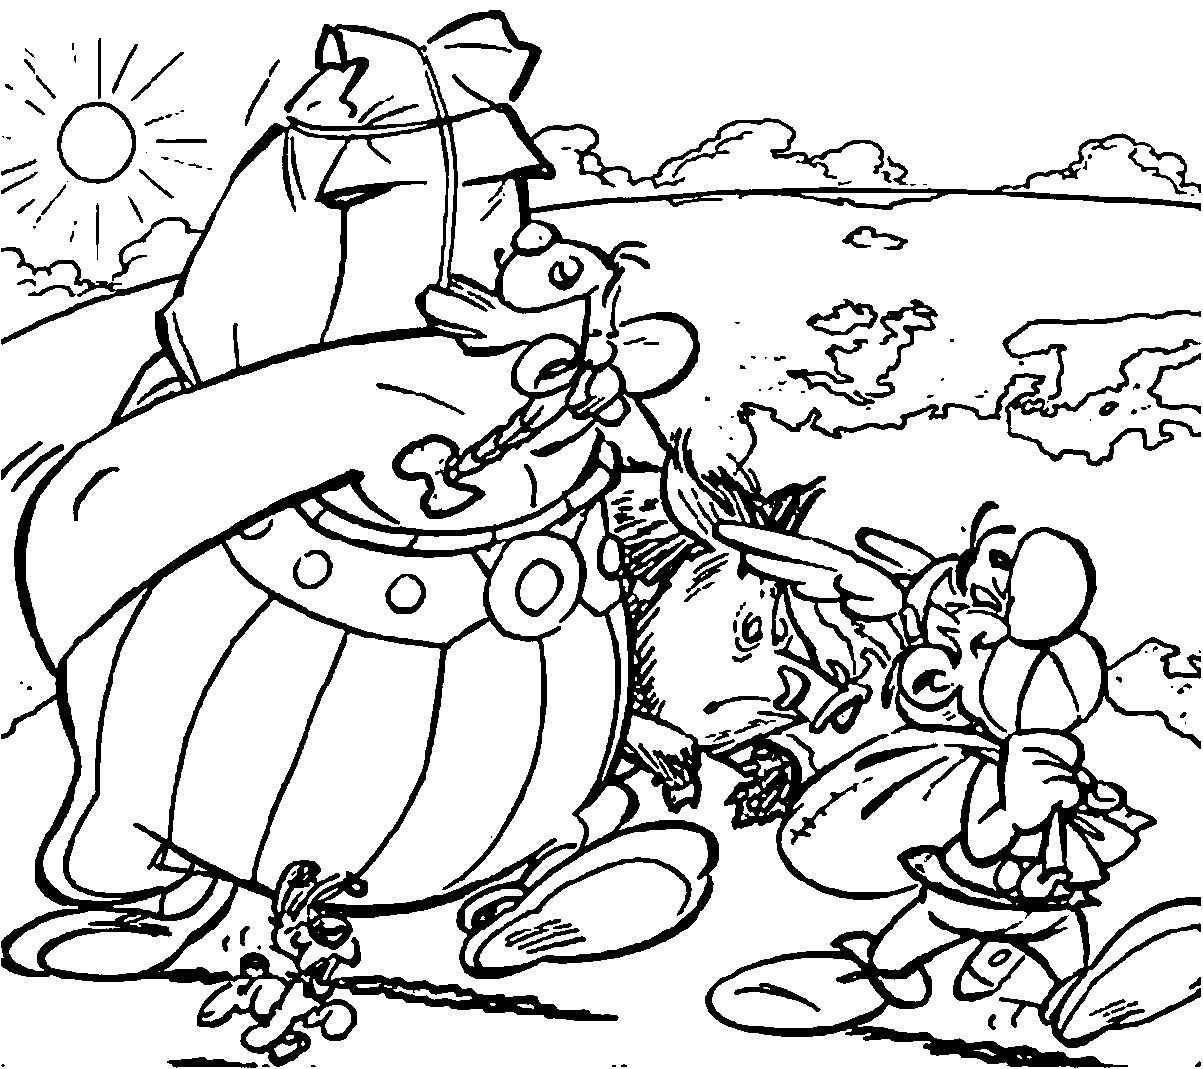 Coloring book Asterix and Obelix on a journey to print and online